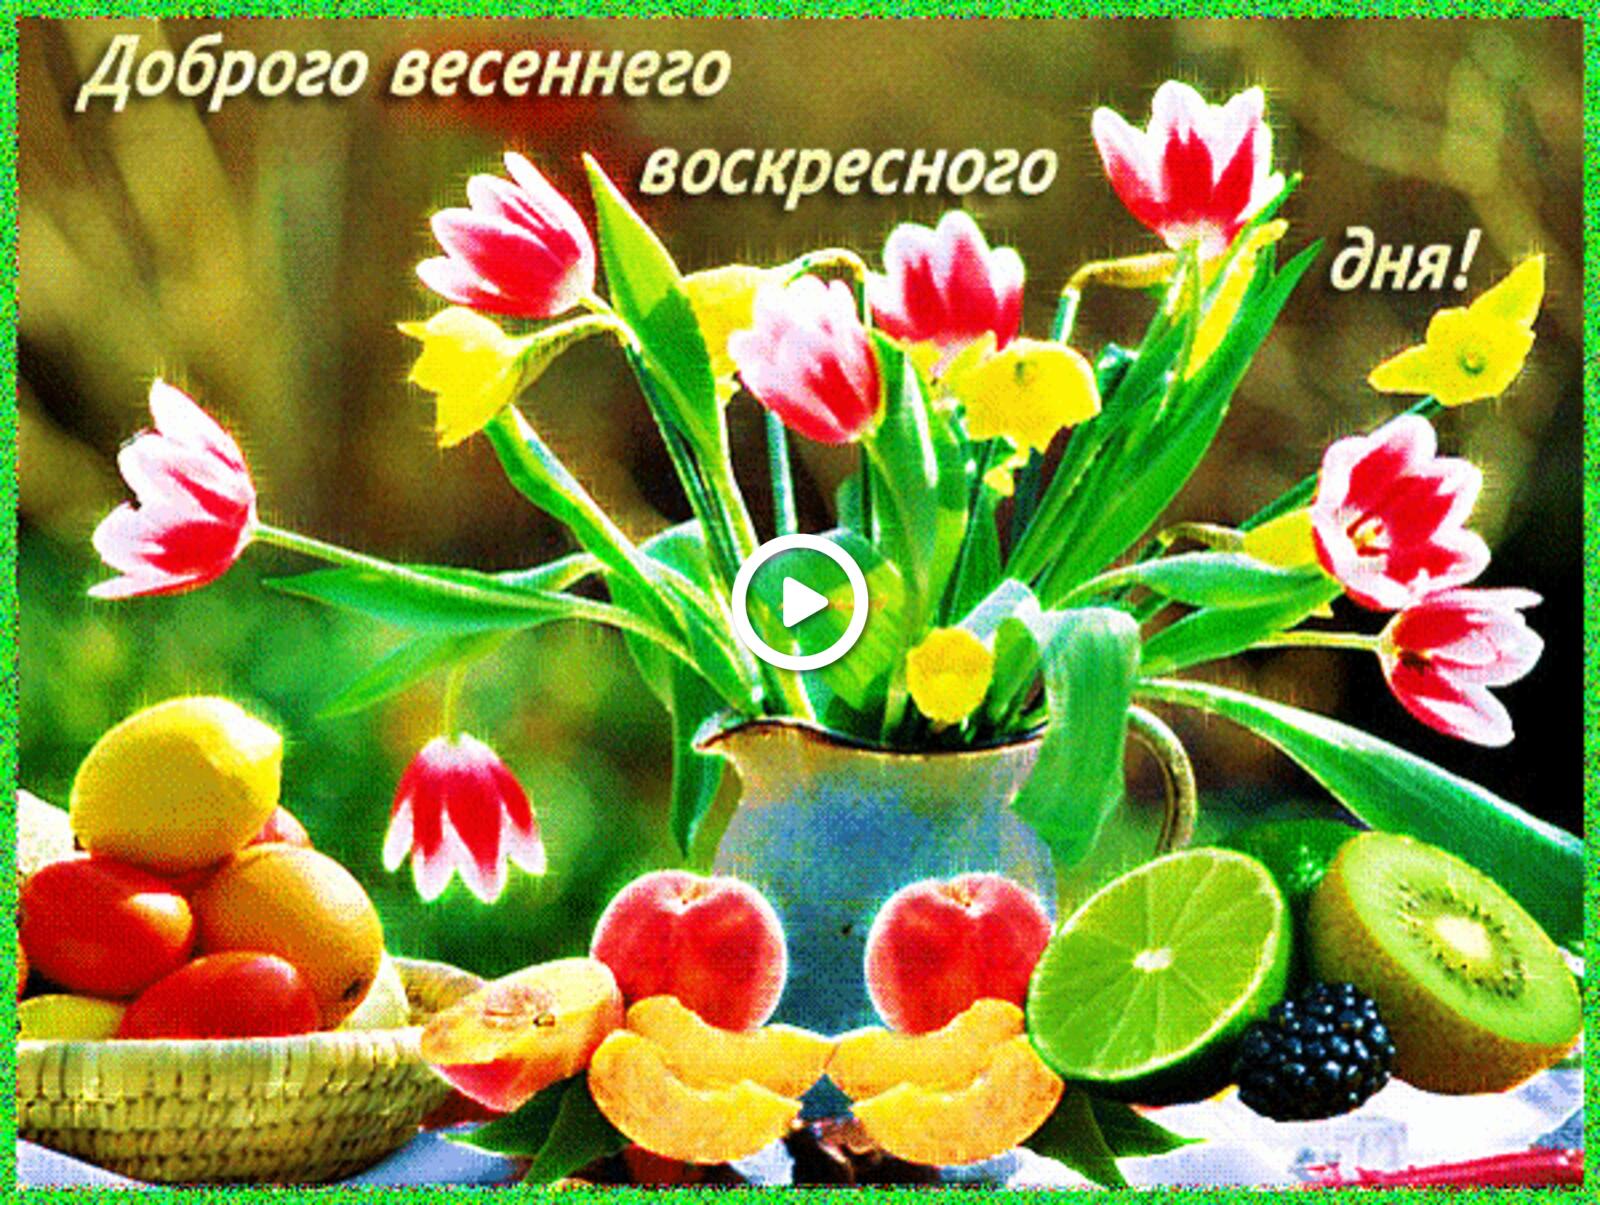 A postcard on the subject of good sunday morning good morning beautiful spring pictures fruits for free